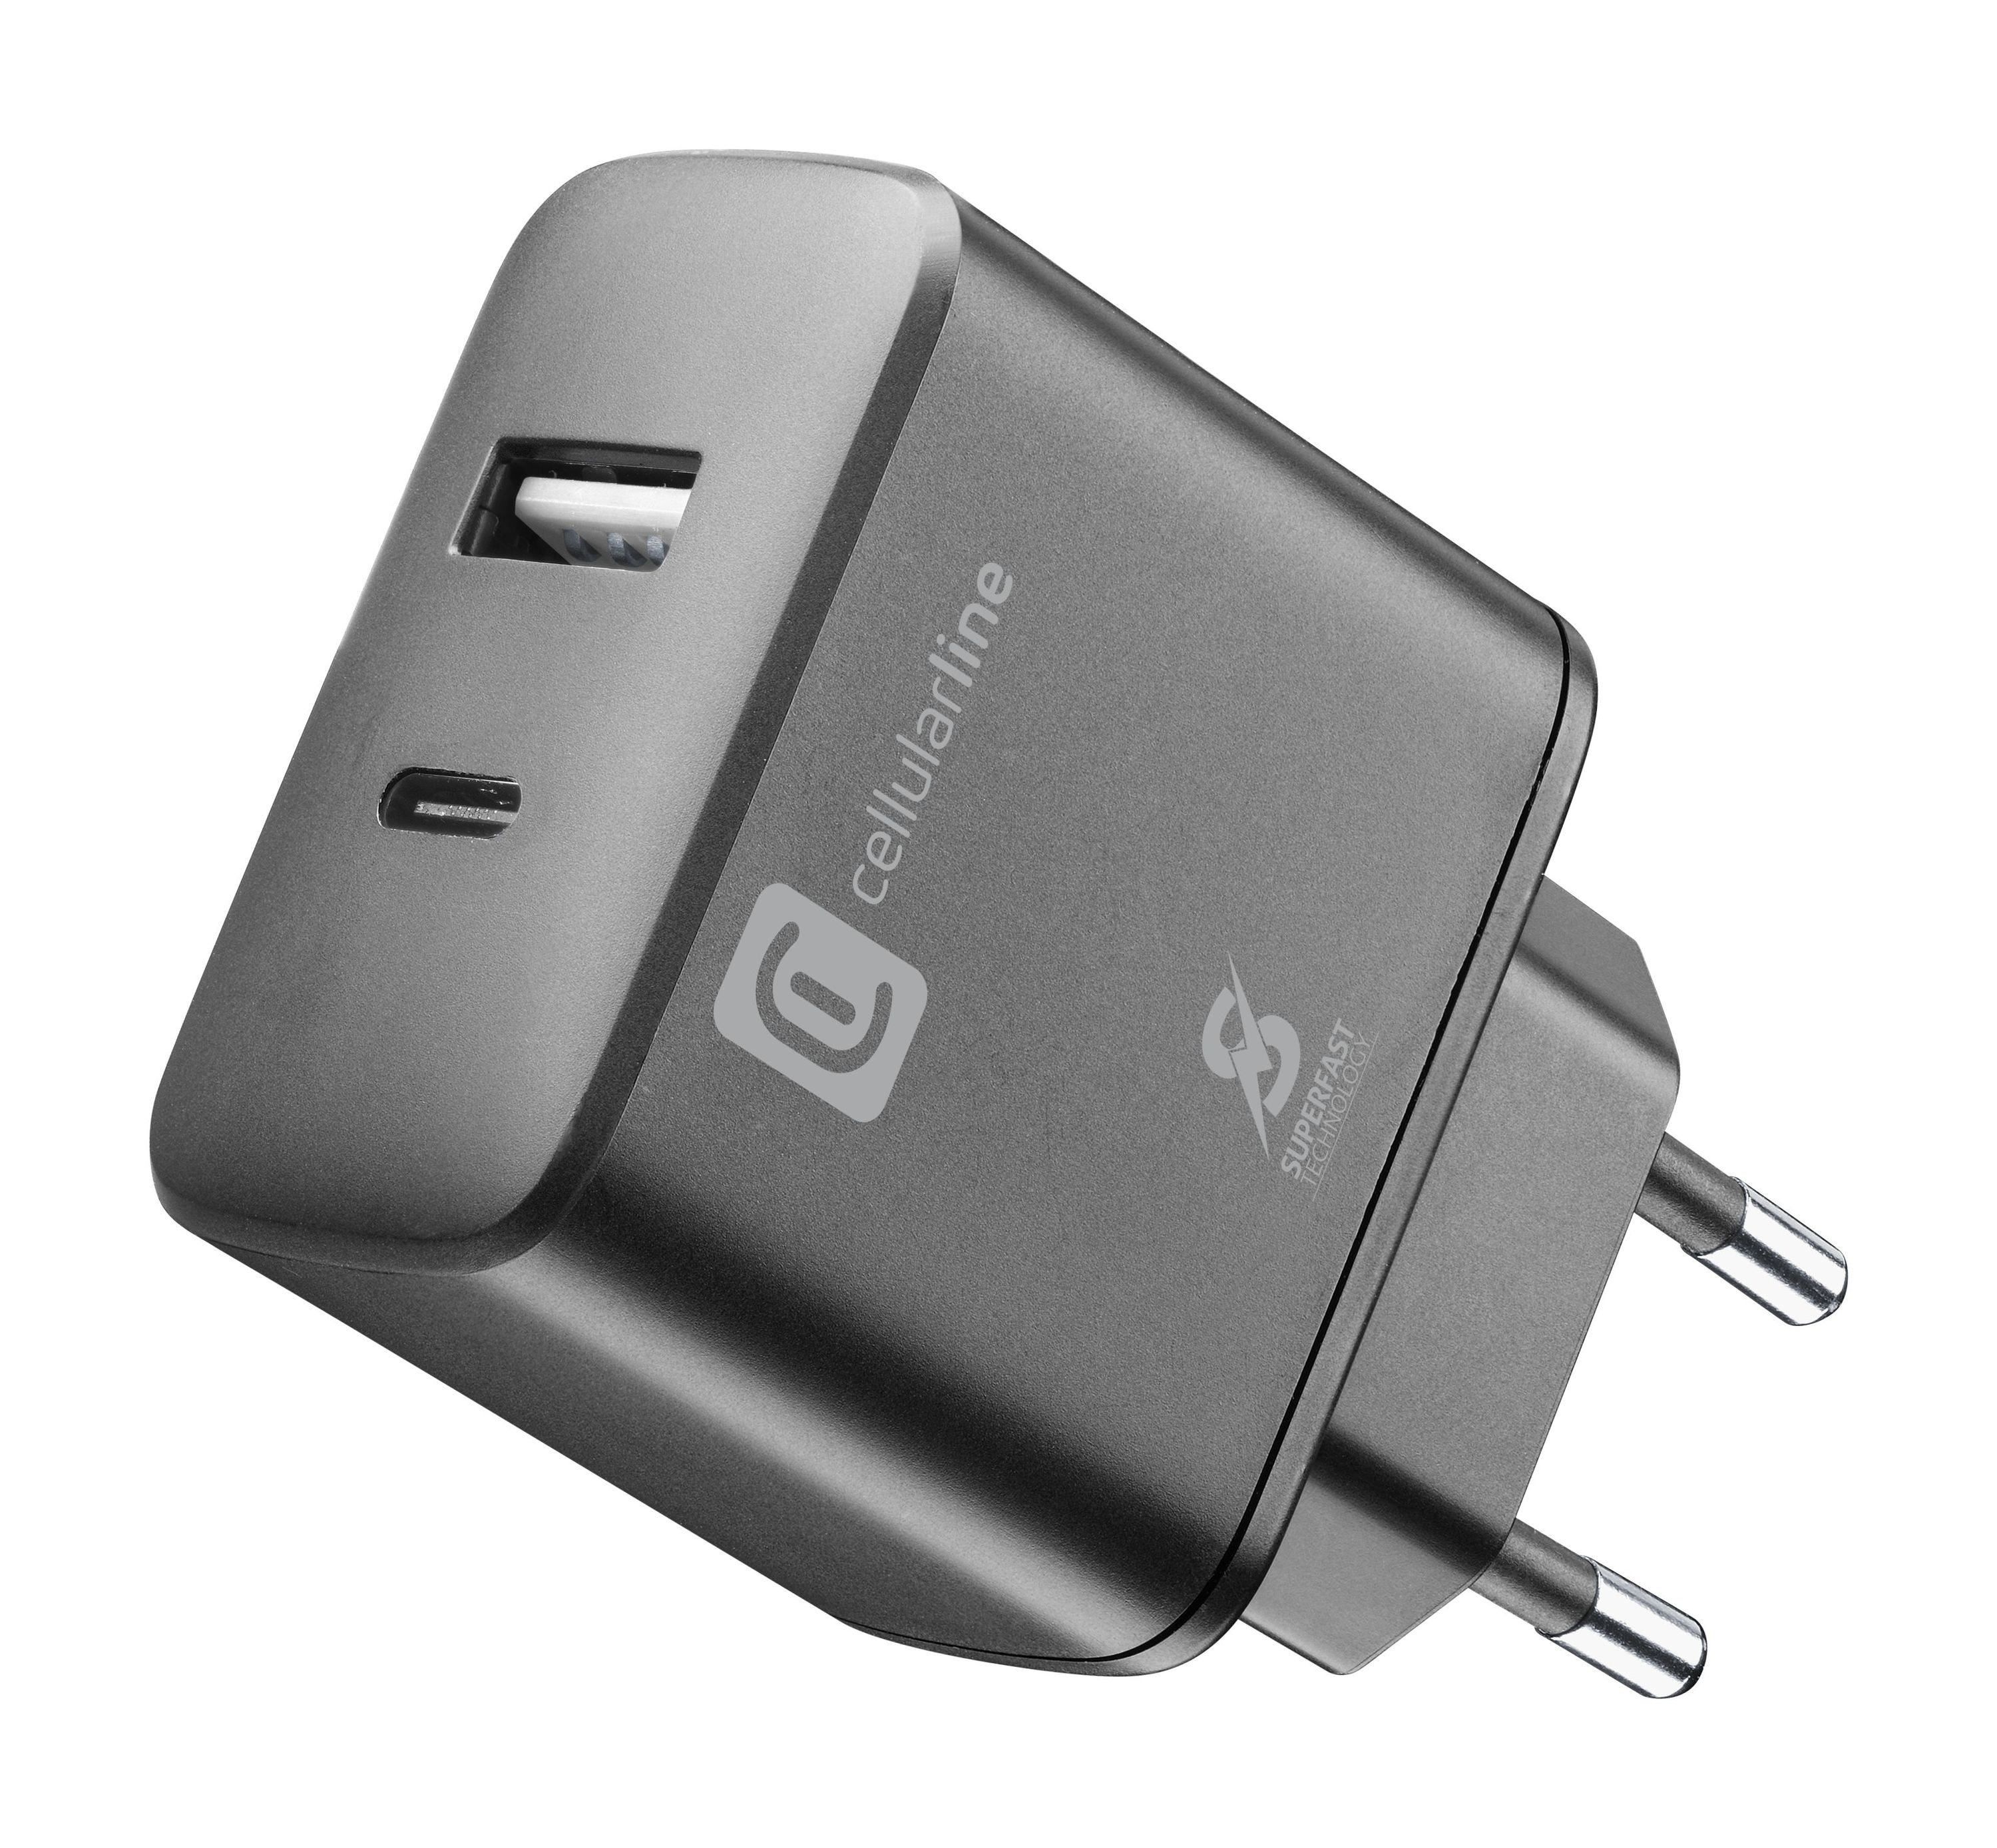 Samsung 15w Super Fast Wireless Charger With Travel Adapter - Gray : Target